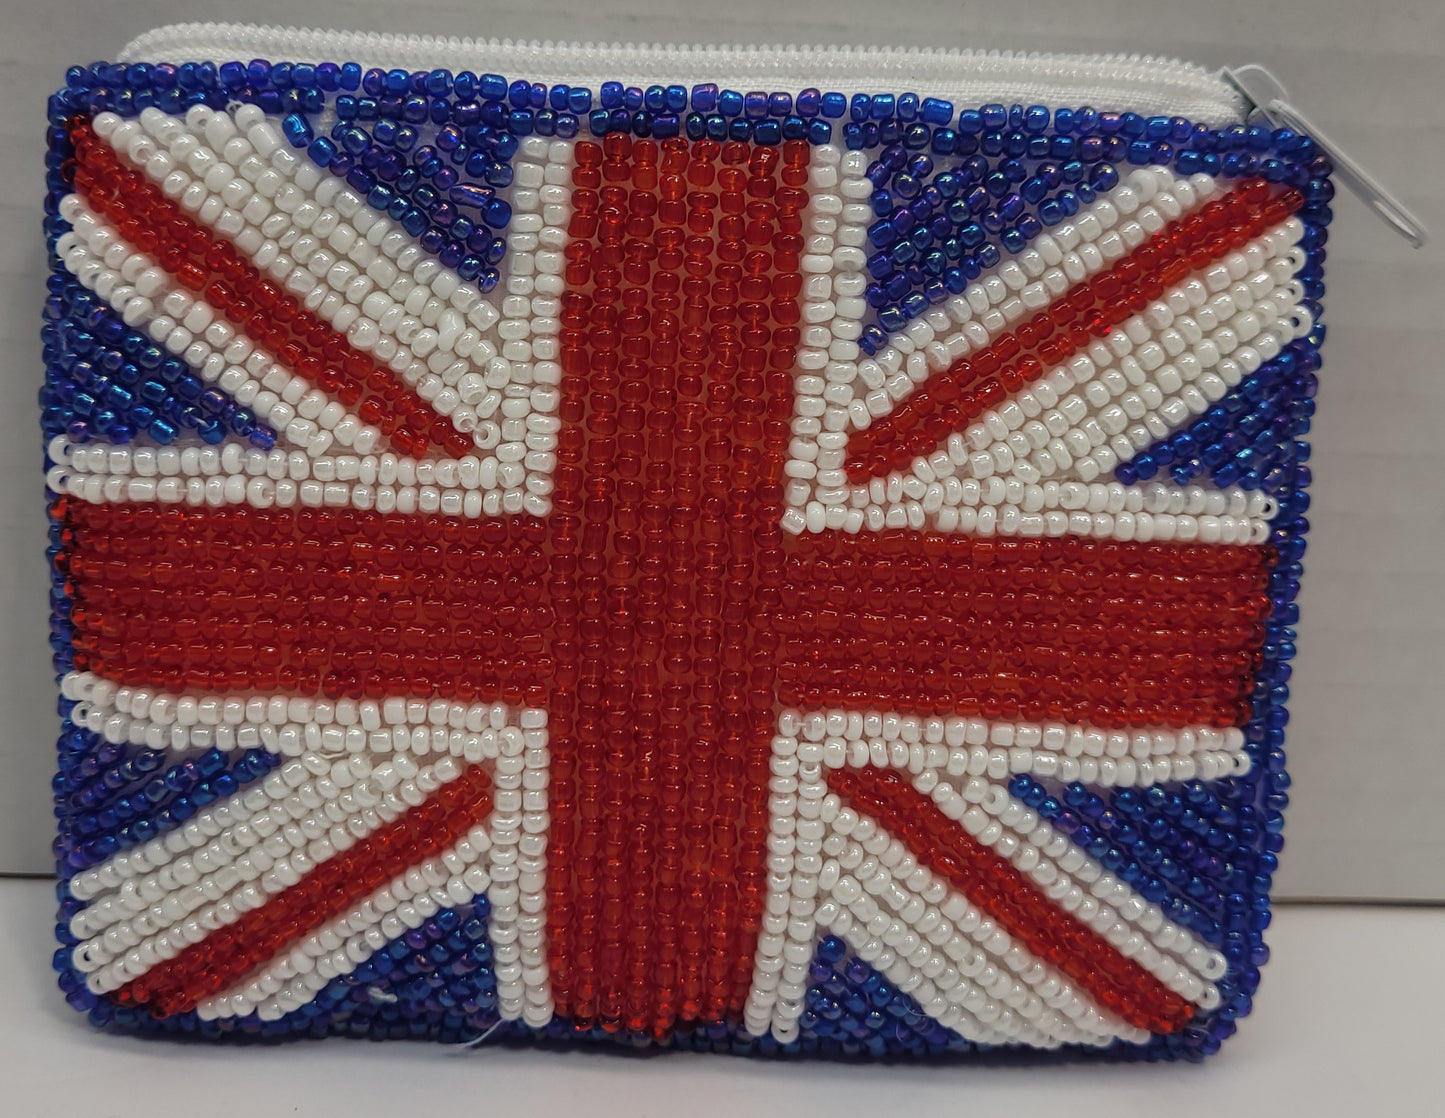 Union Jack beaded change purse with zipper.  Liner inside is white.